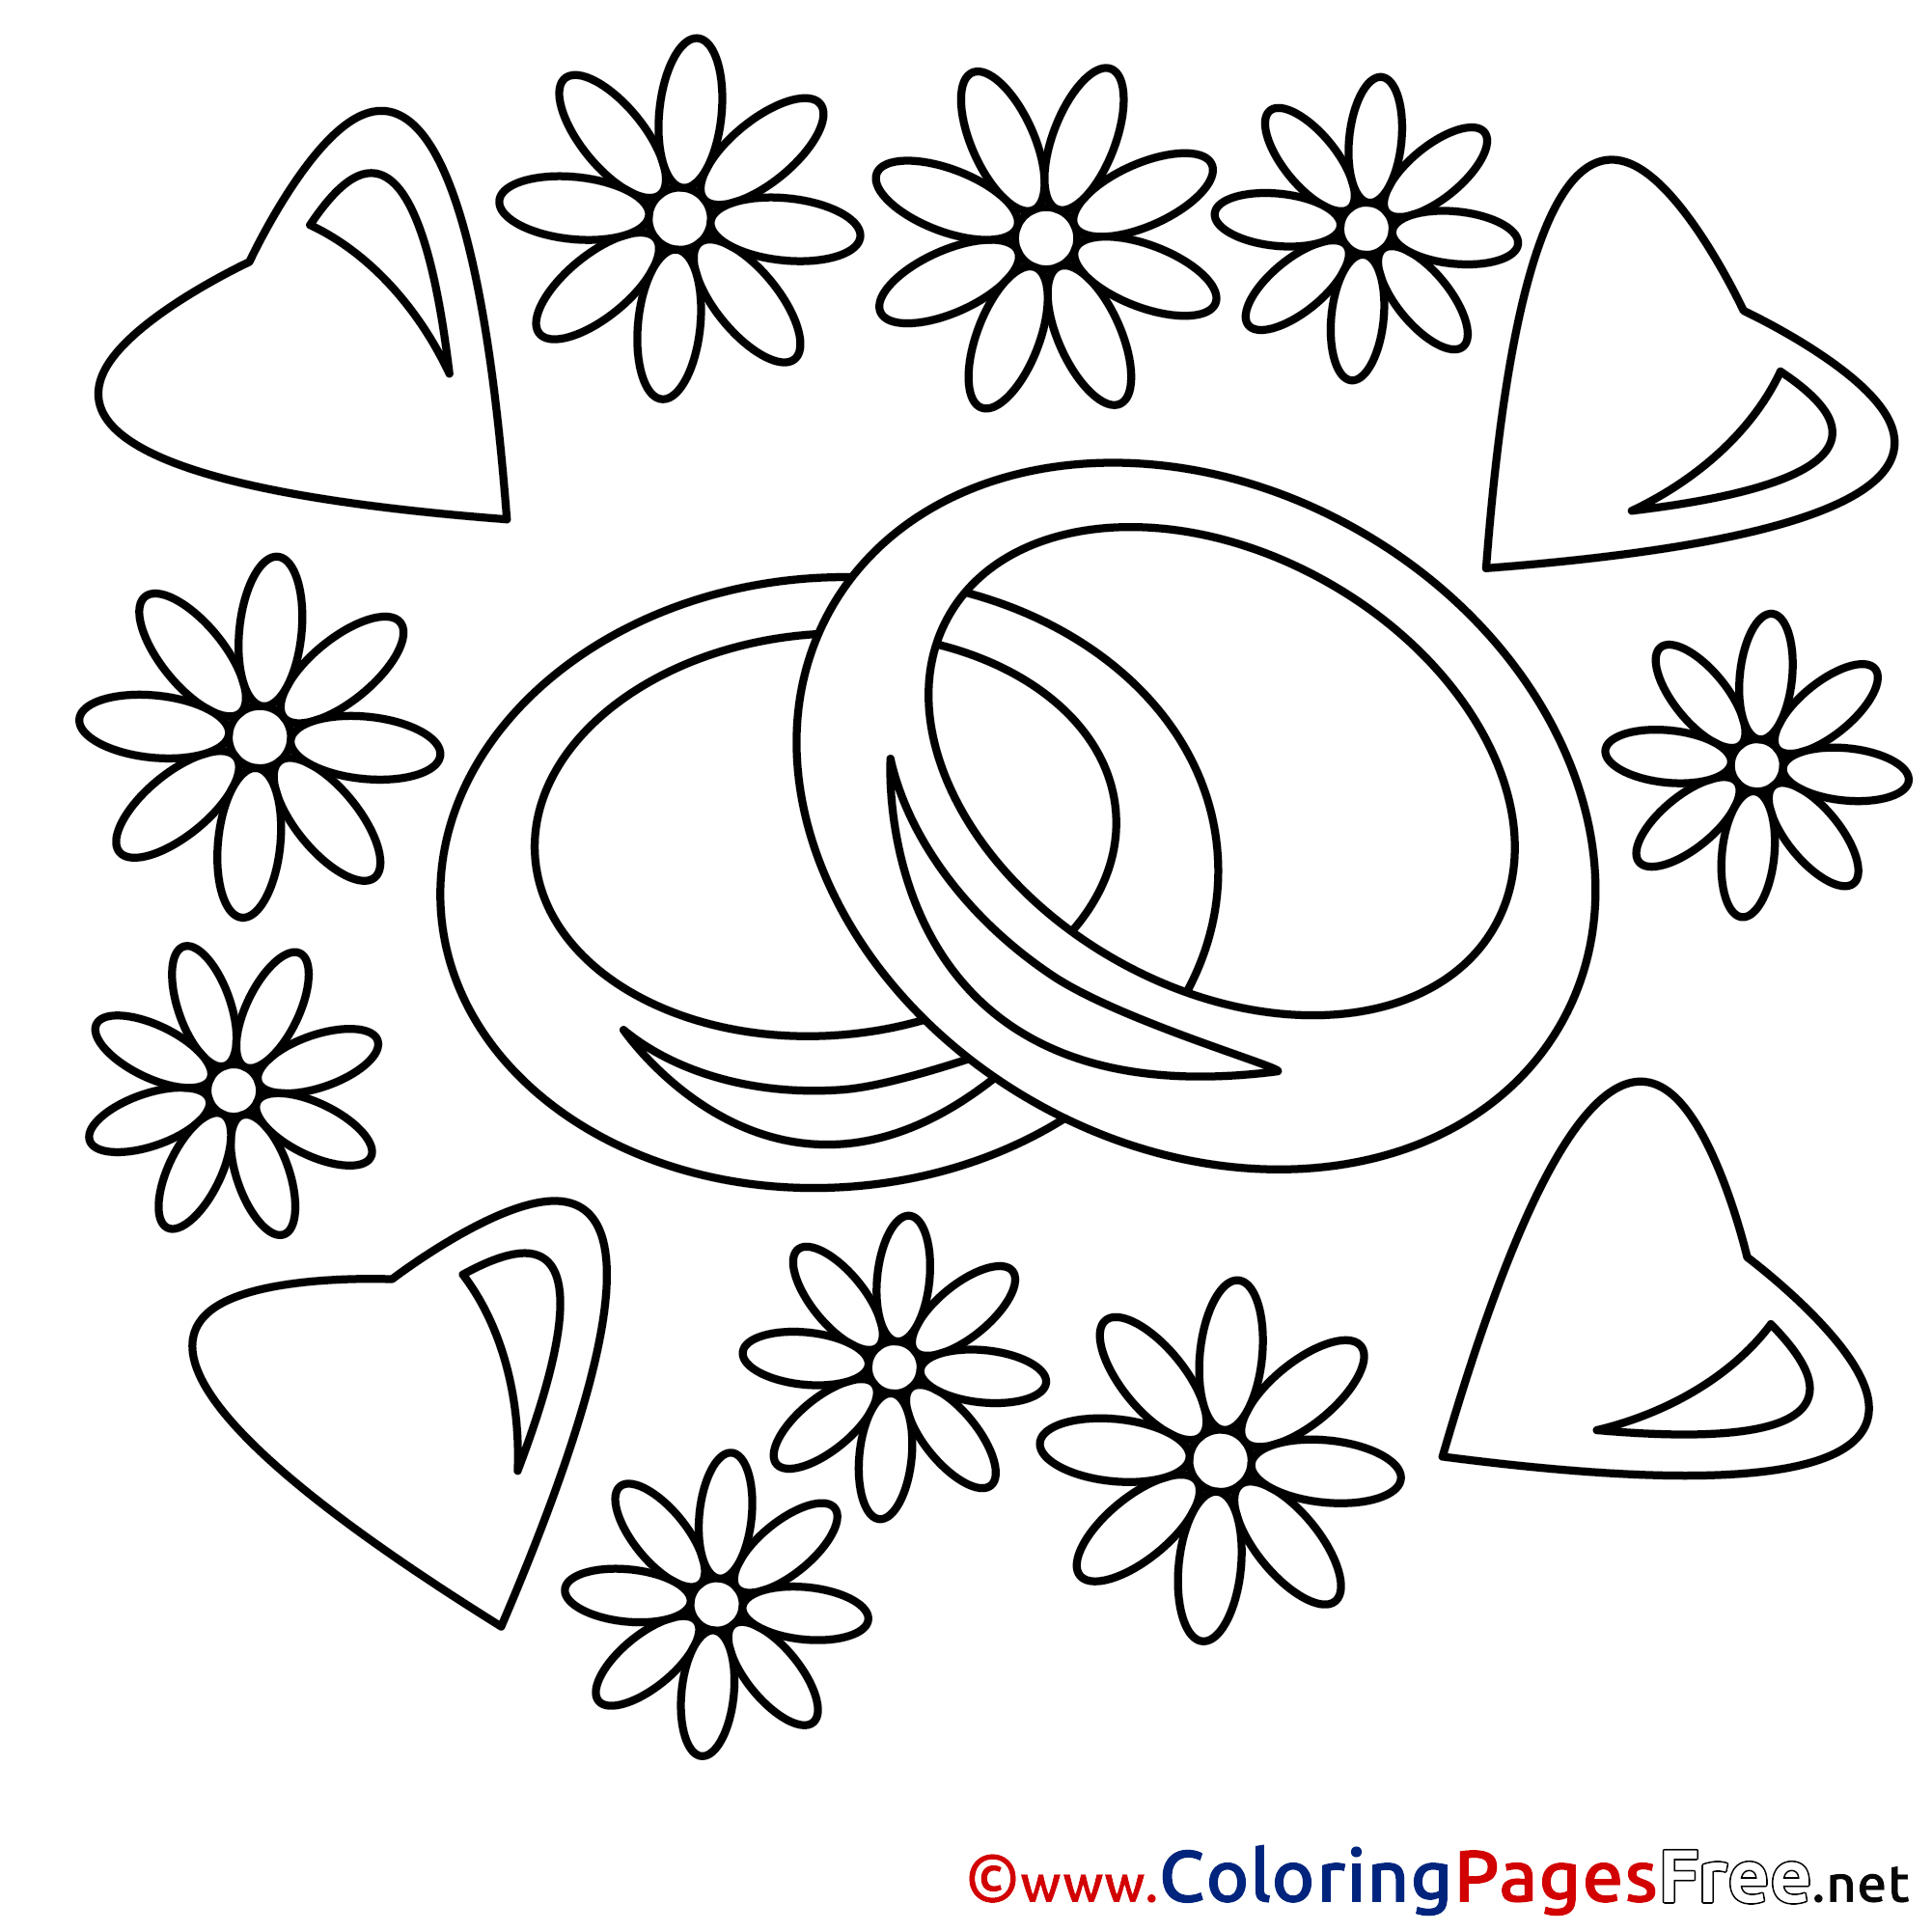 Wedding Rings Coloring Page | Katie Soltysiak | Flickr